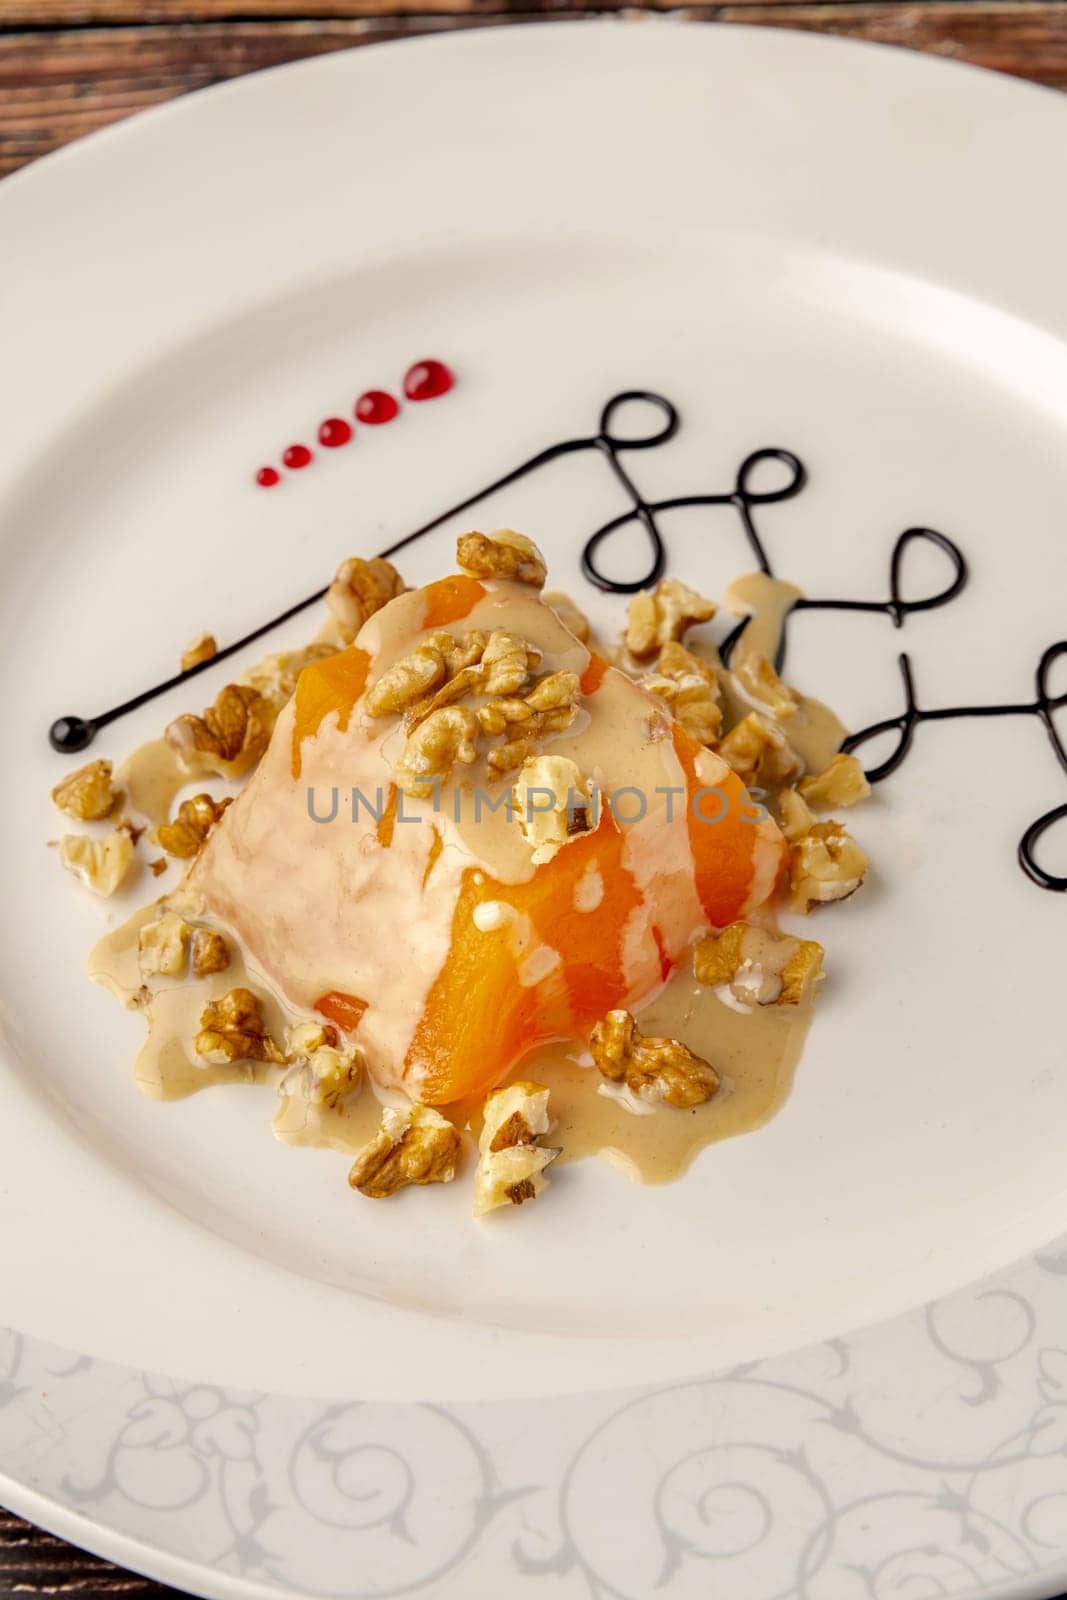 Pumpkin dessert with tahini and walnuts on a white porcelain plate by Sonat